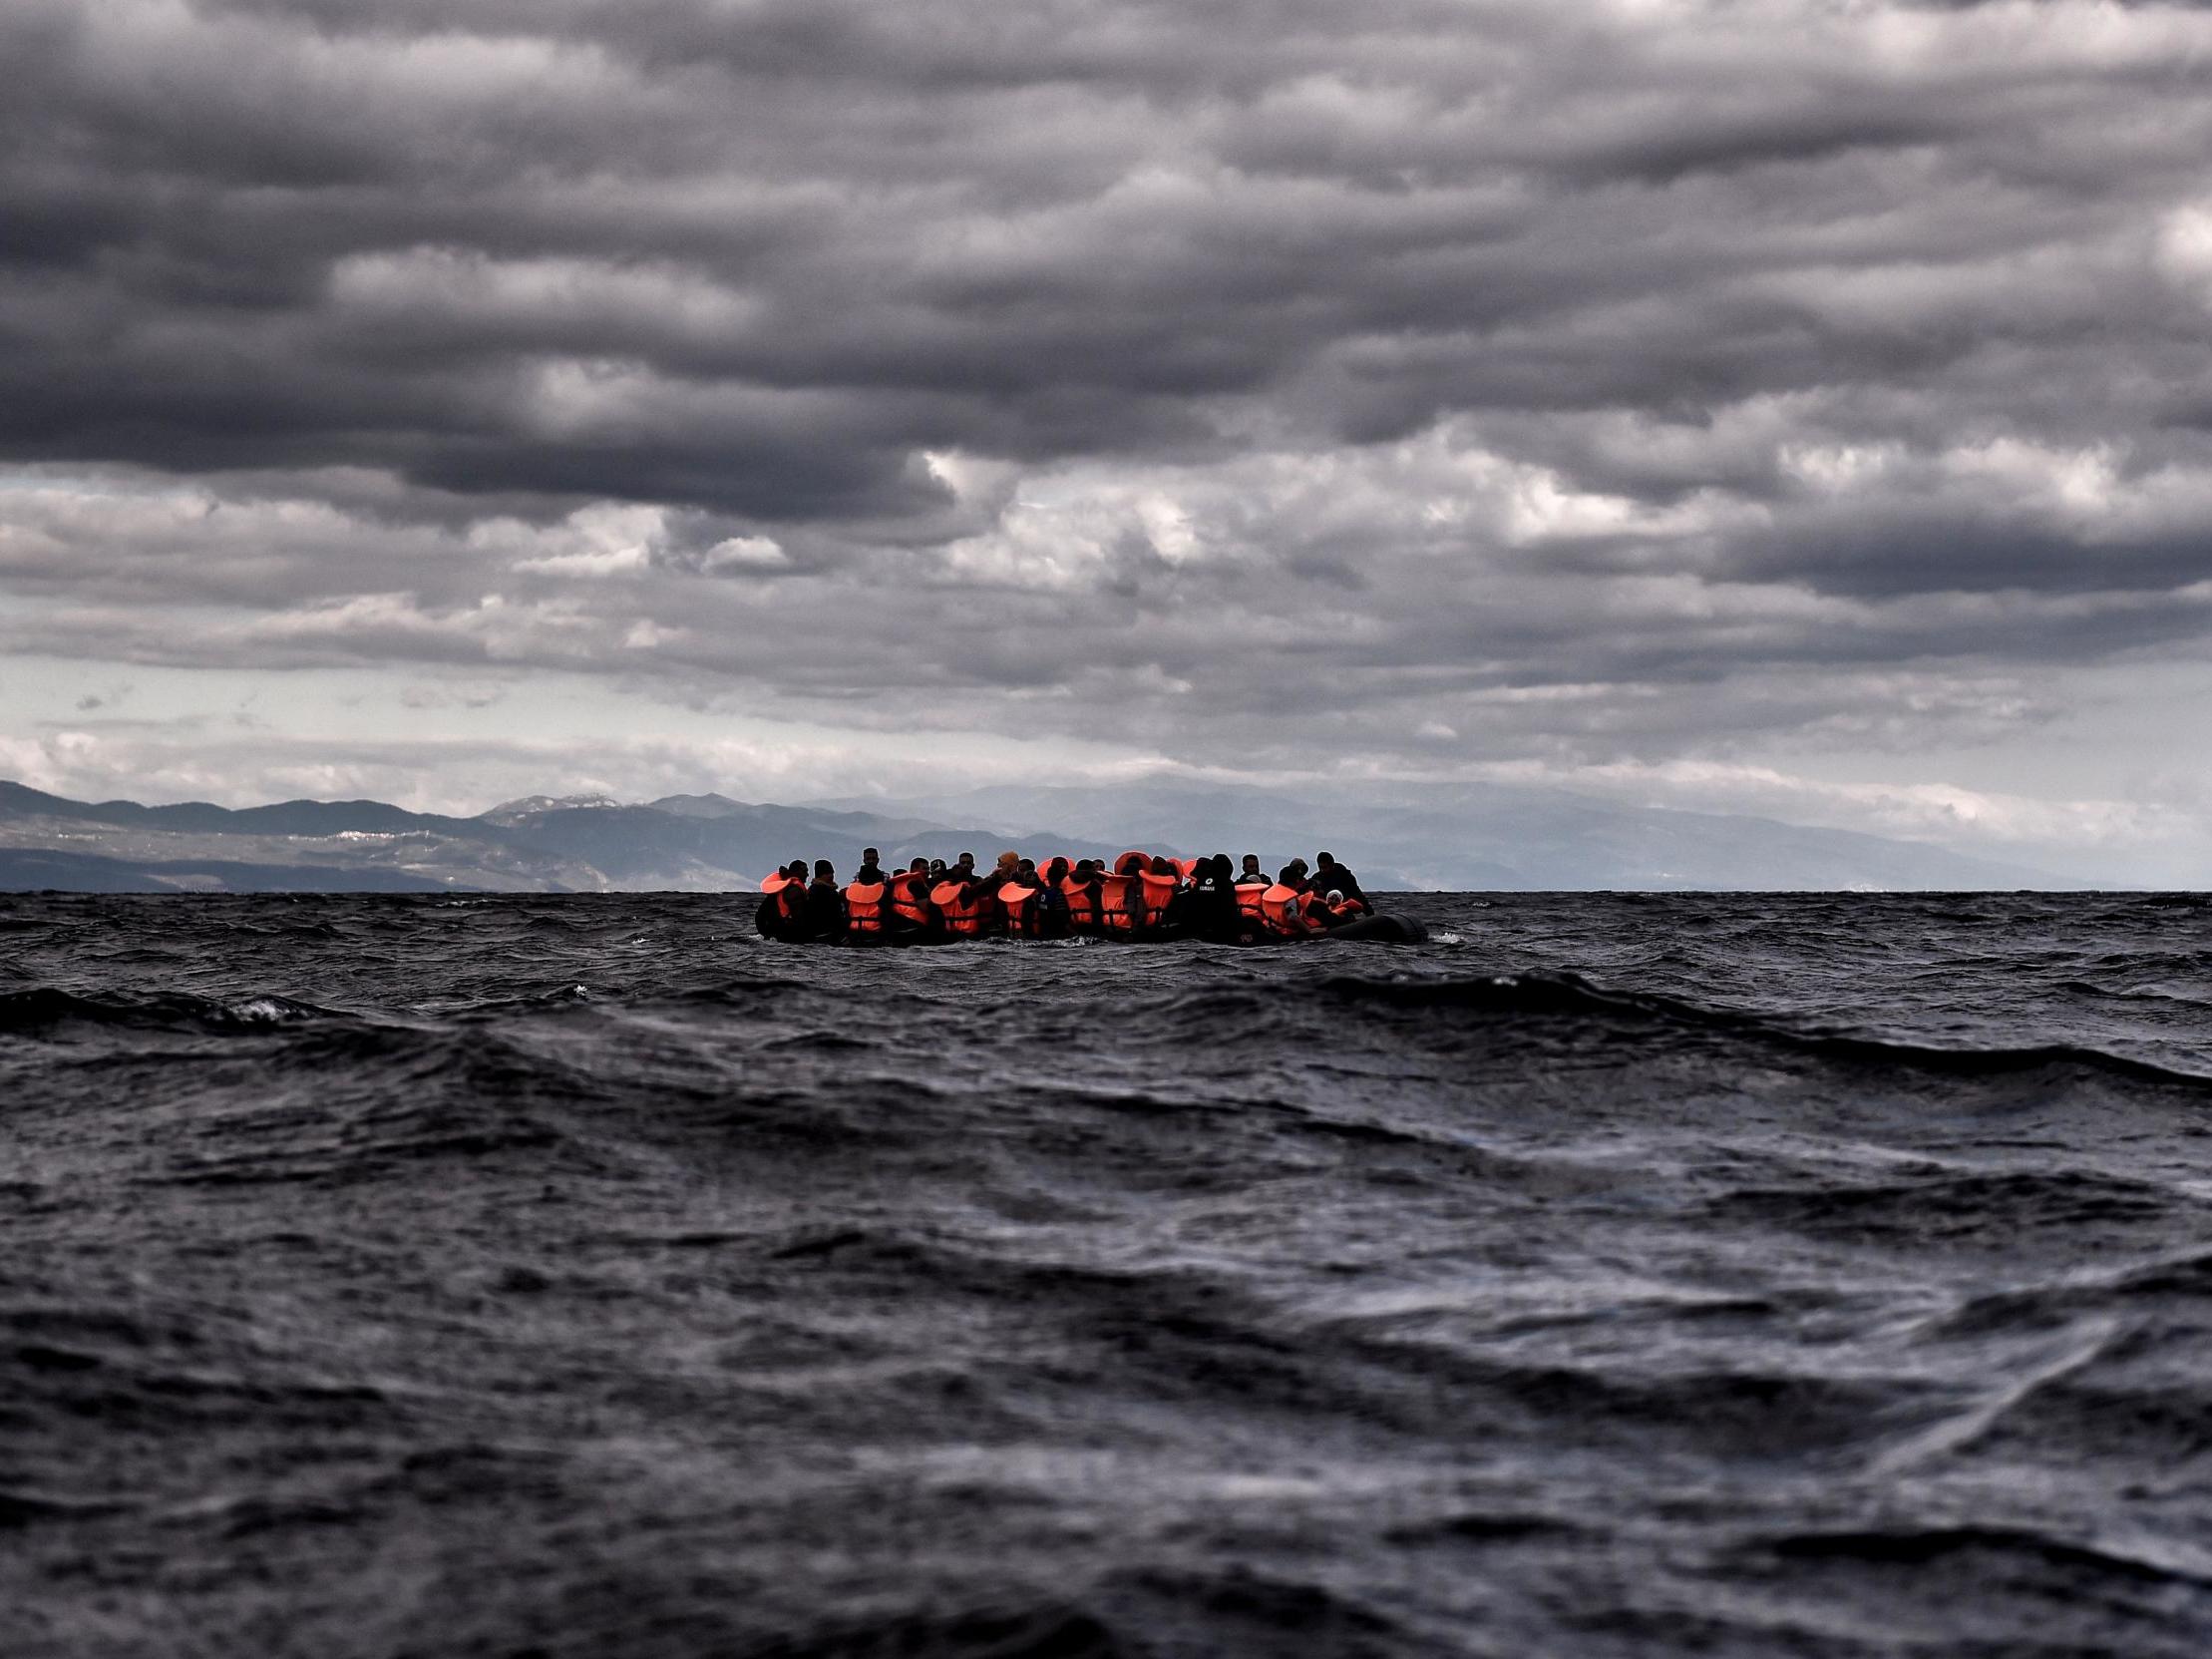 Refugees and migrants sail towards the Greek island of Lesbos on 25 October 2015 as they cross the Aegean sea from Turkey